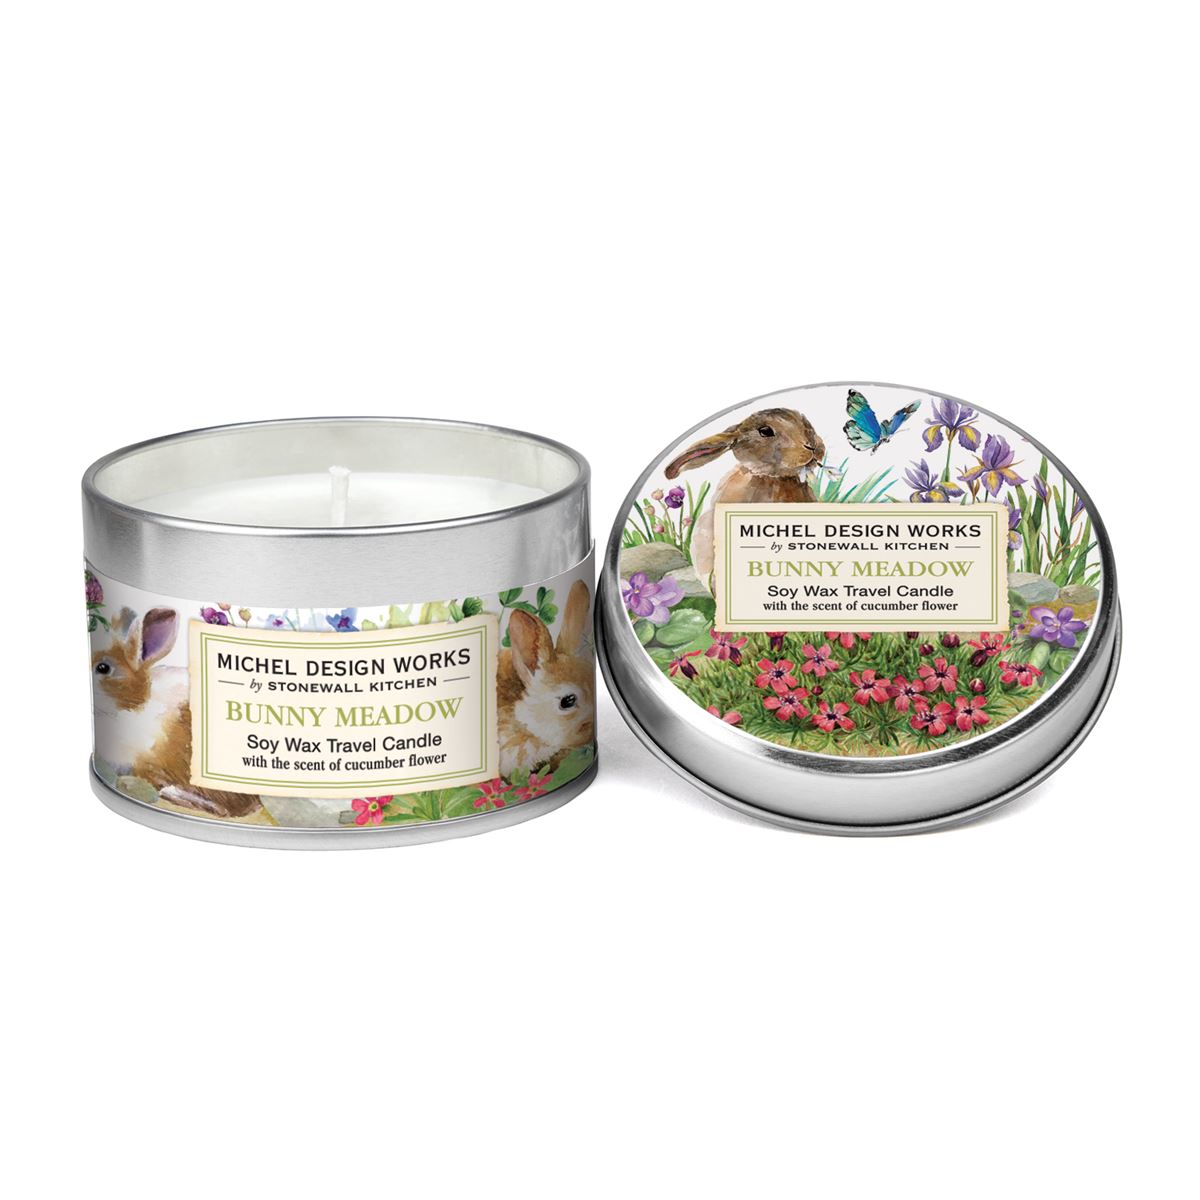 Michel Design Works Travel Tin Candle - 4 oz. - Bunny Meadow